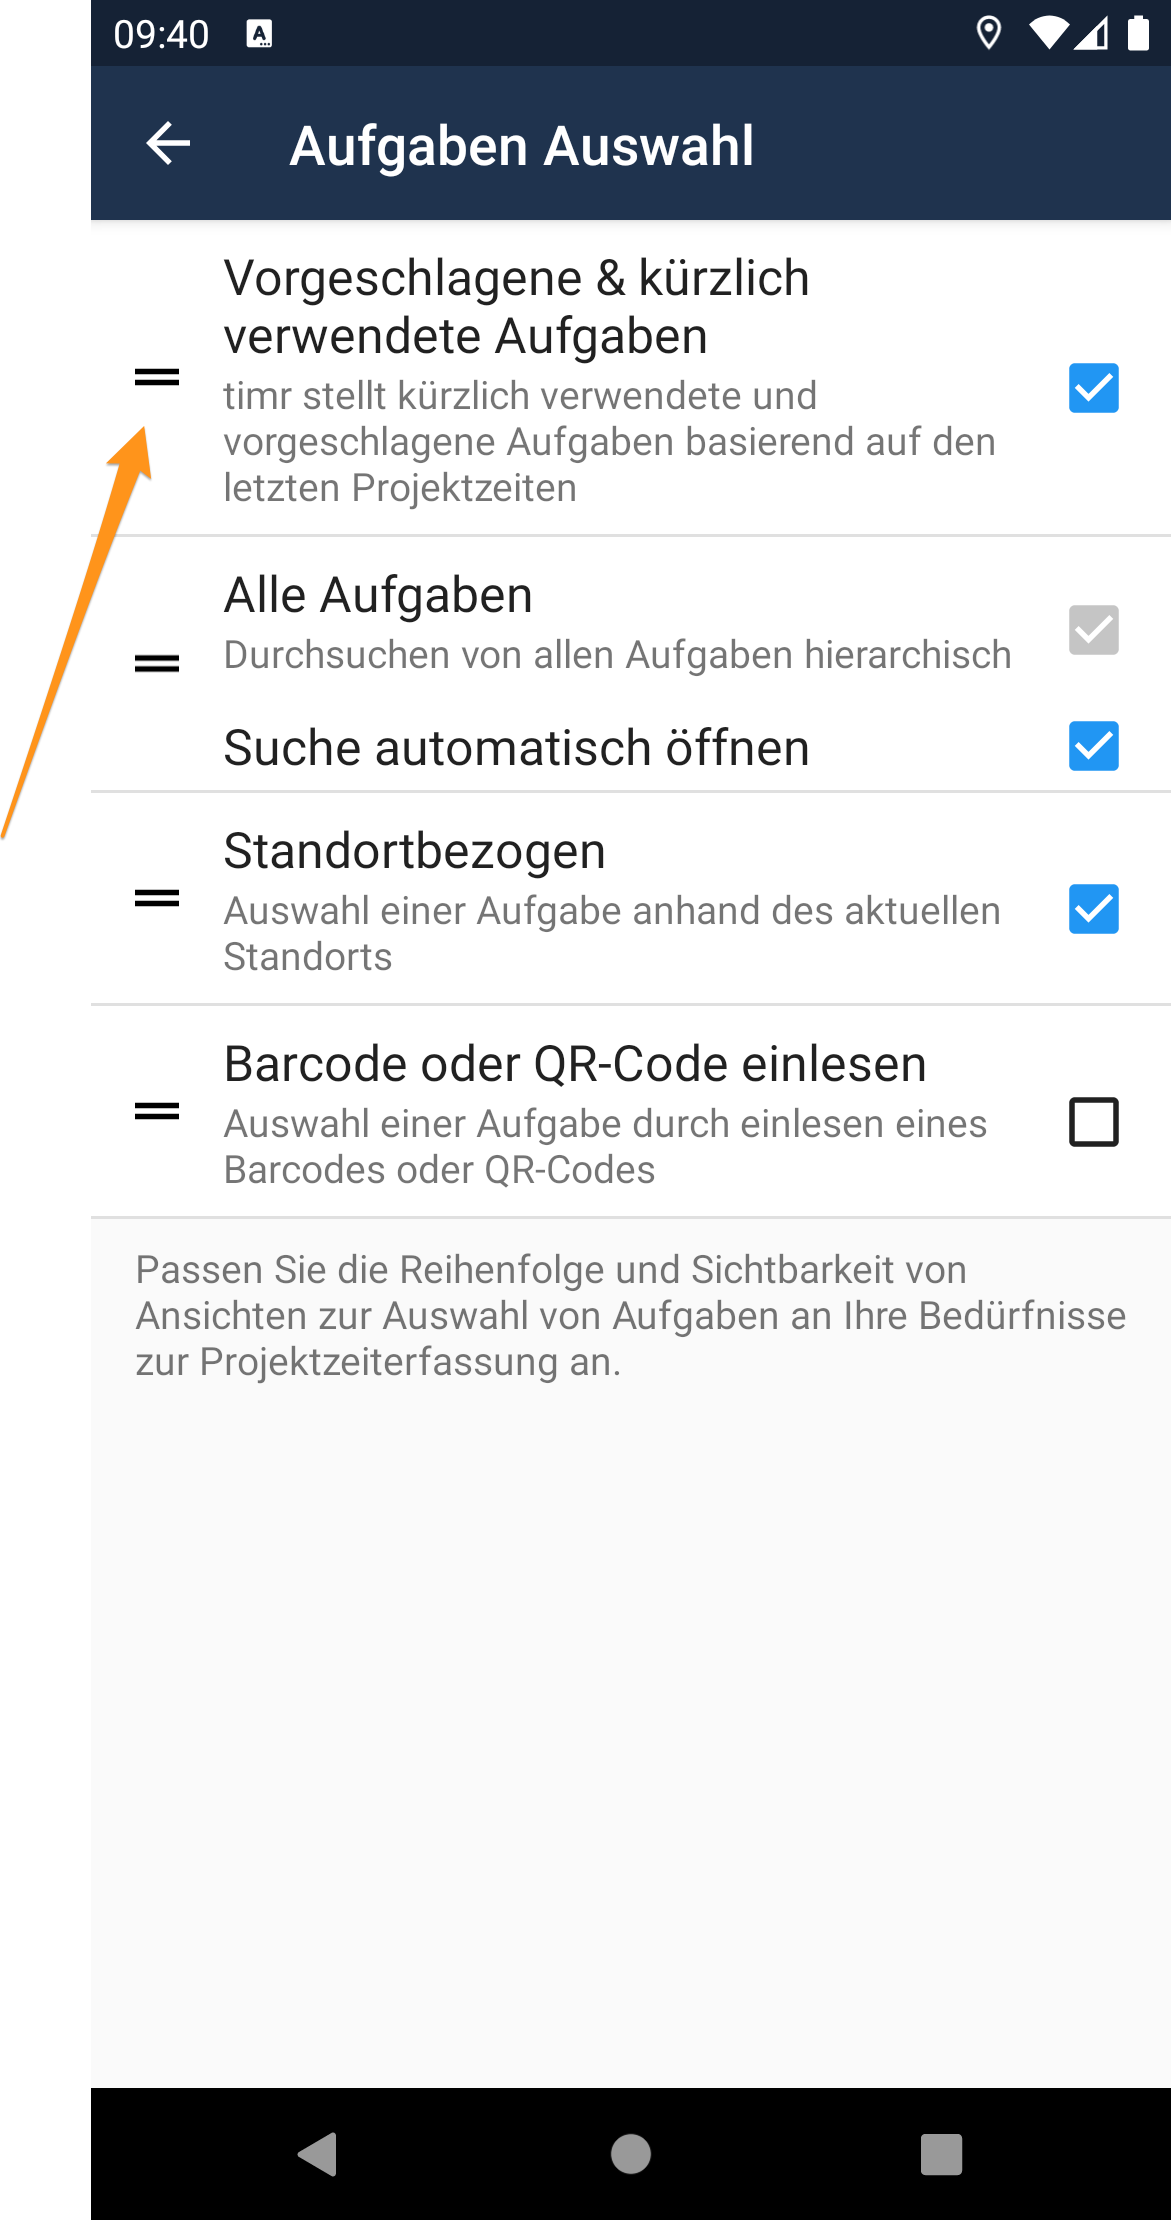 Aufgabenauswahl_Android-m.png